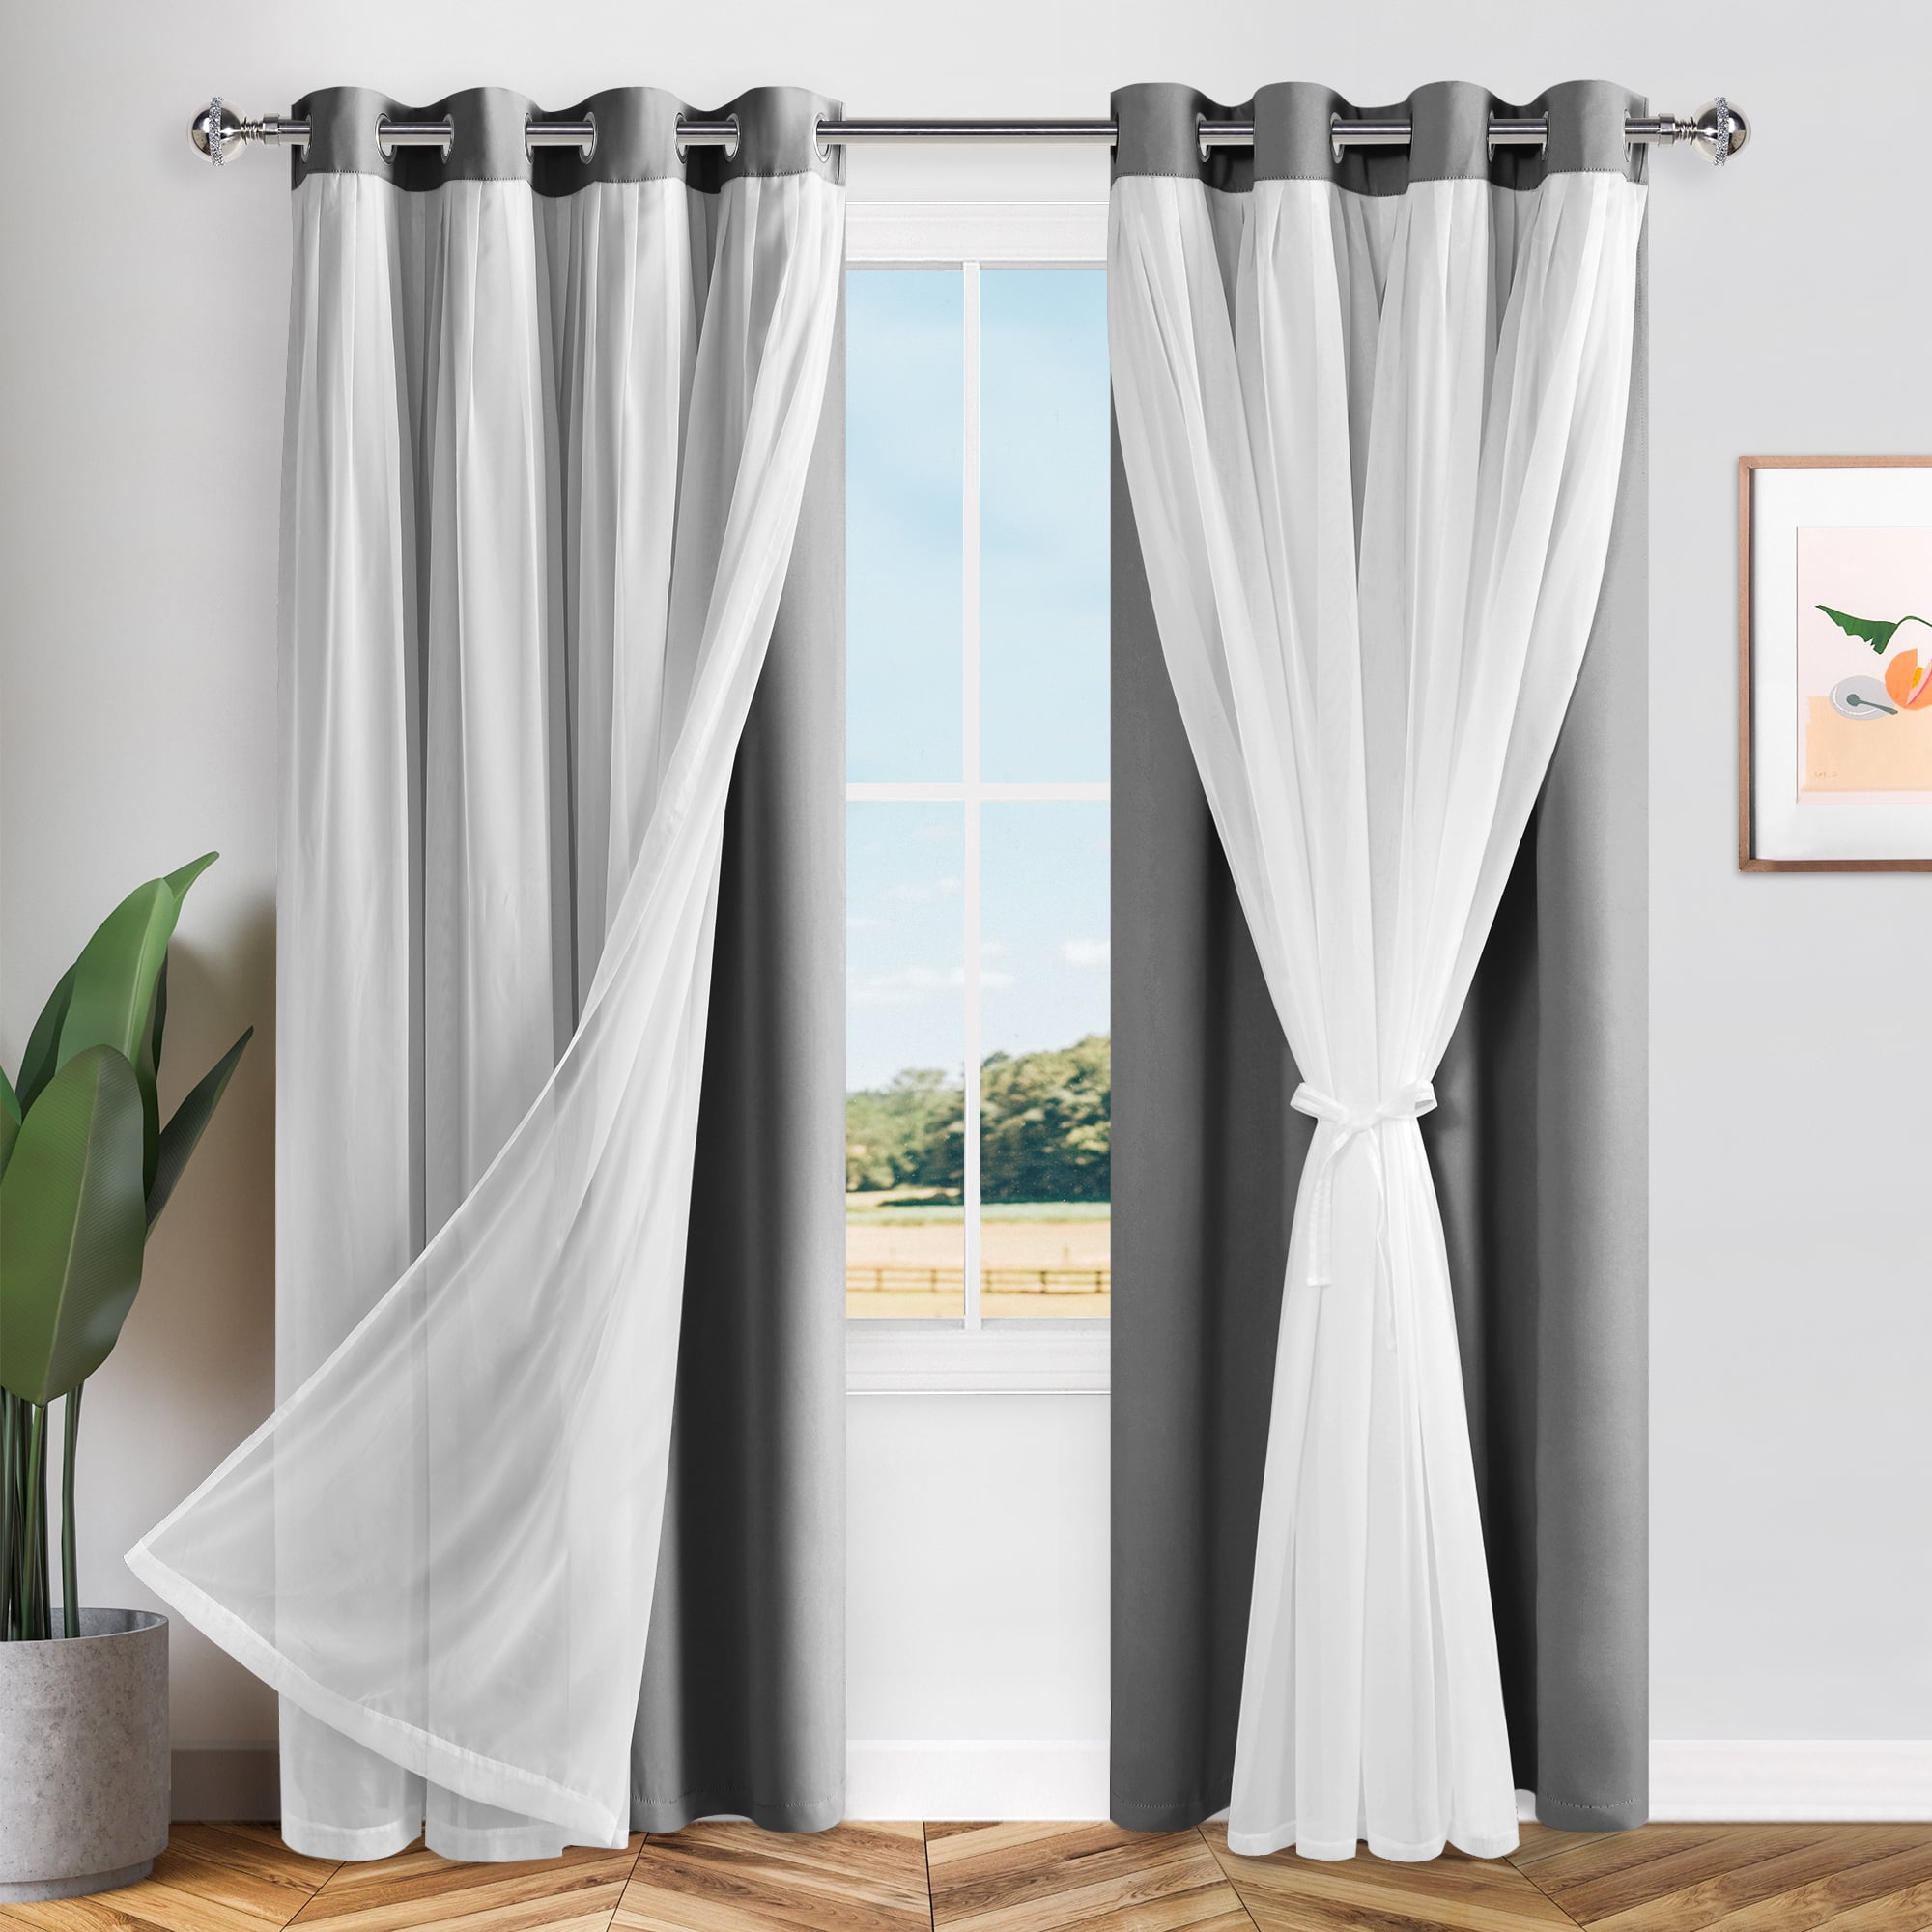 Hiasan Grey Blackout Curtains with Sheer Overlay, Grommet Thermal